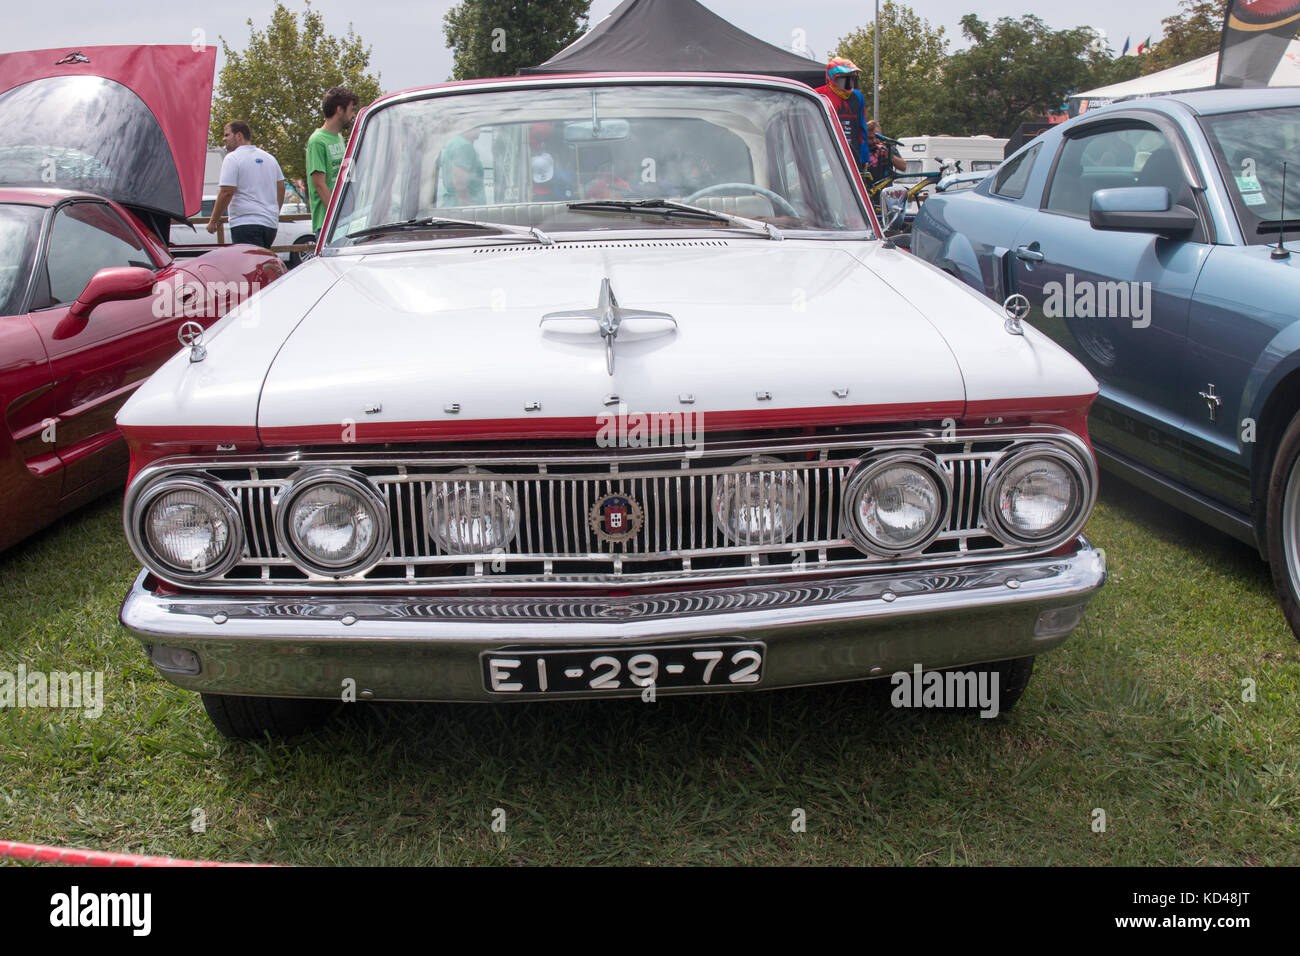 FARO, PORTUGAL, 26th August 2017: 6º American Cars Show Algarve Event where several vintage cars are in display and a mix of Americana related activit Stock Photo